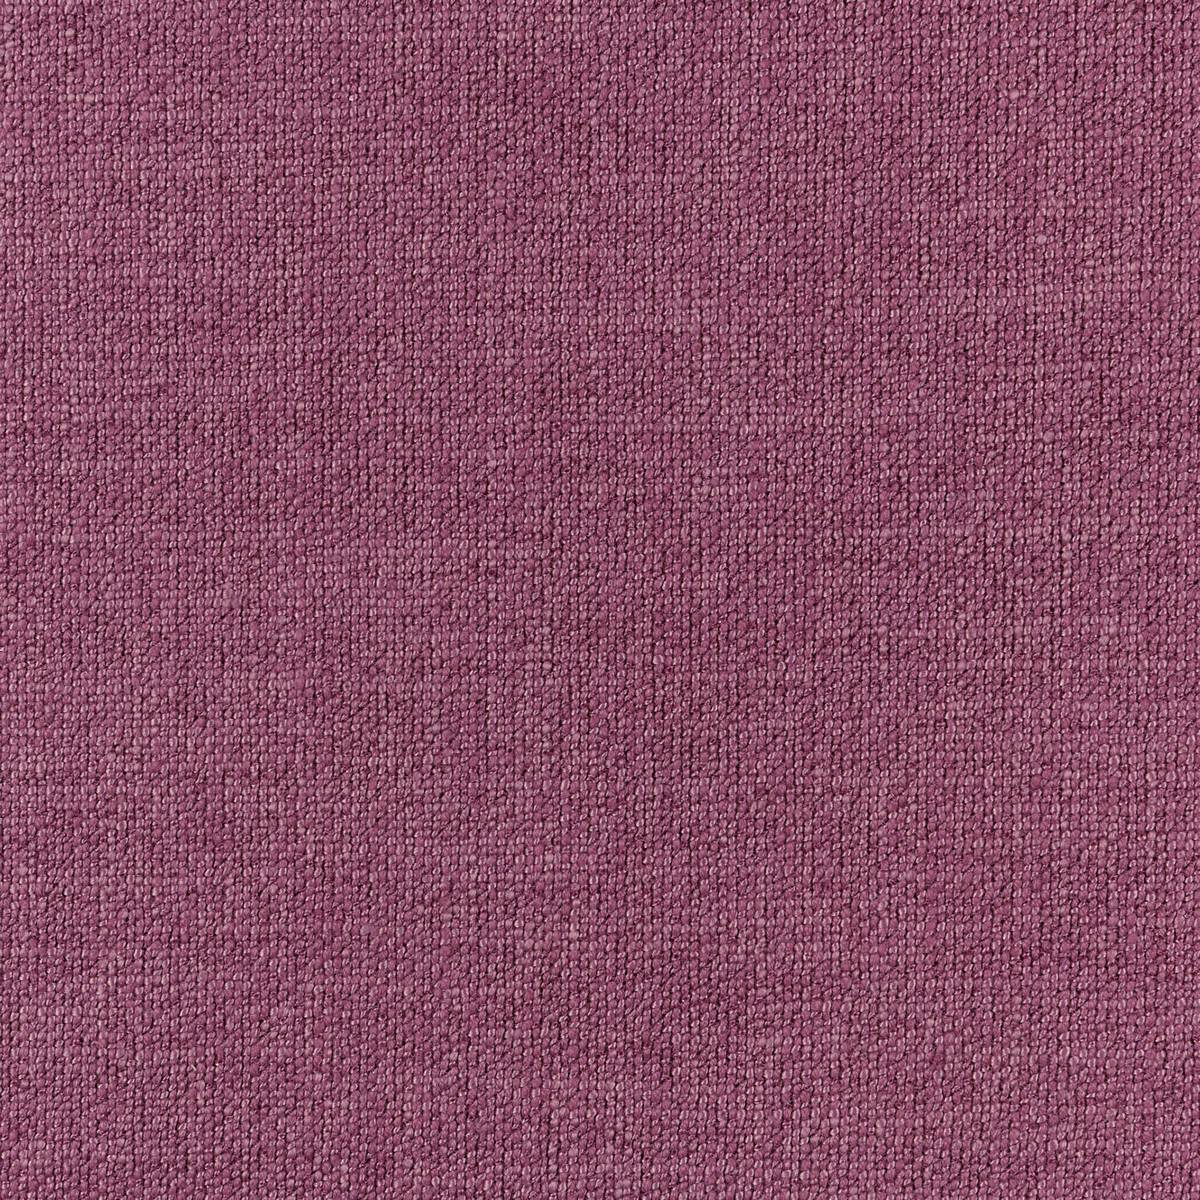 Subject Orchid Fabric by Harlequin